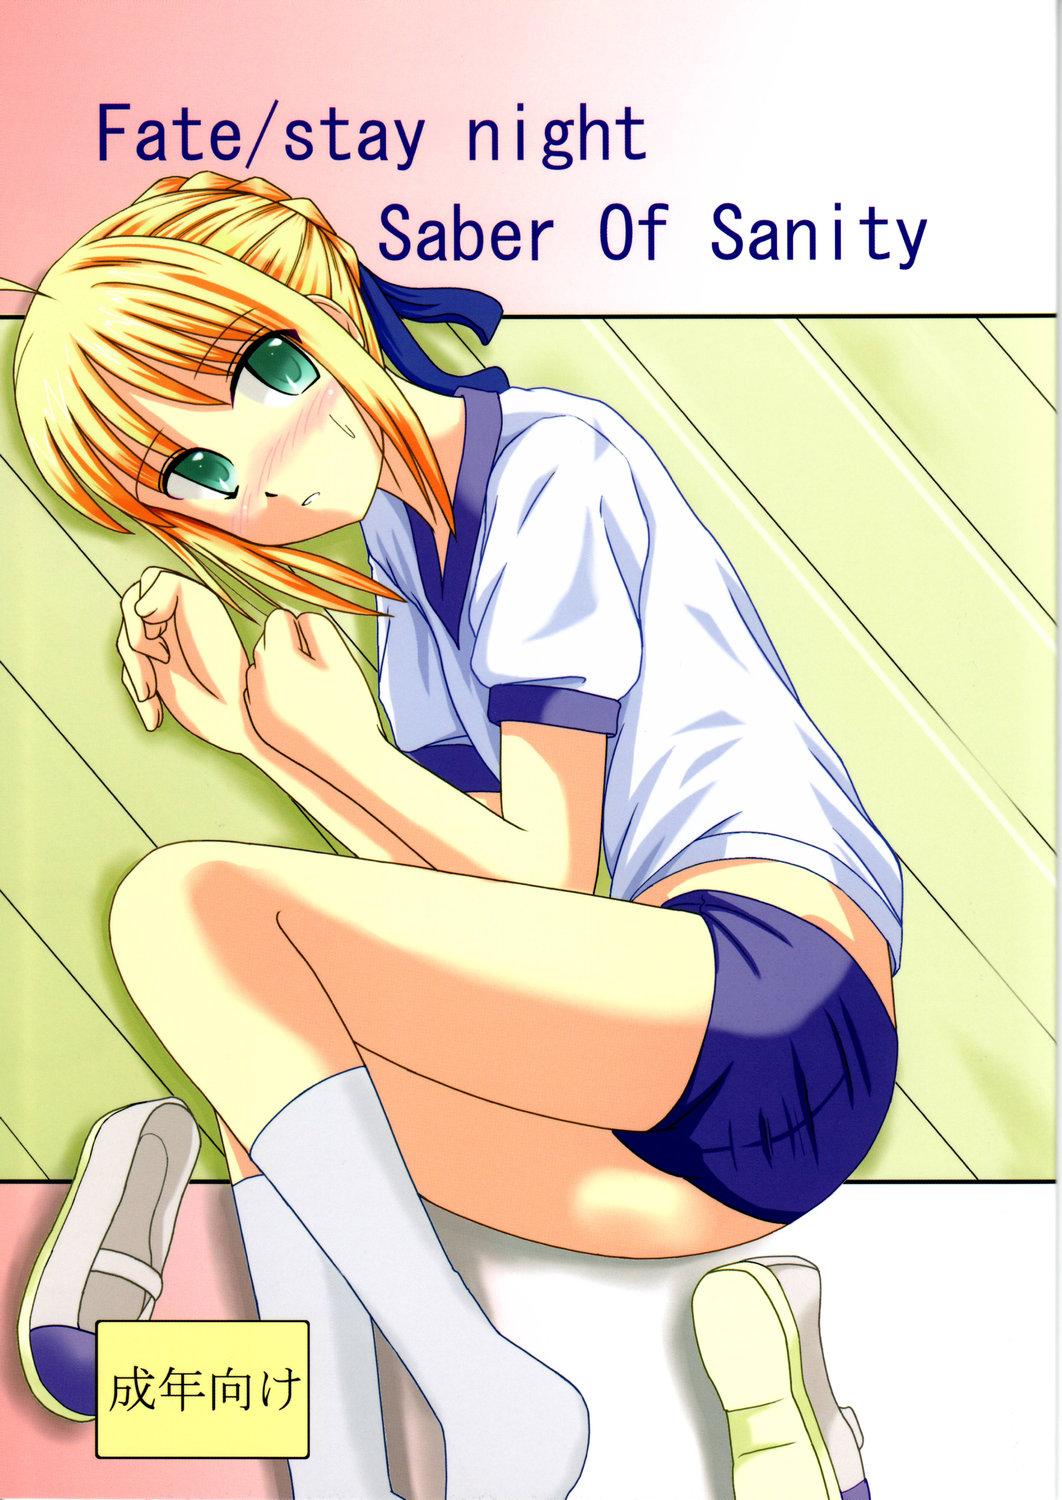 Blonde Saber Of Sanity - Fate stay night Puba - Picture 1